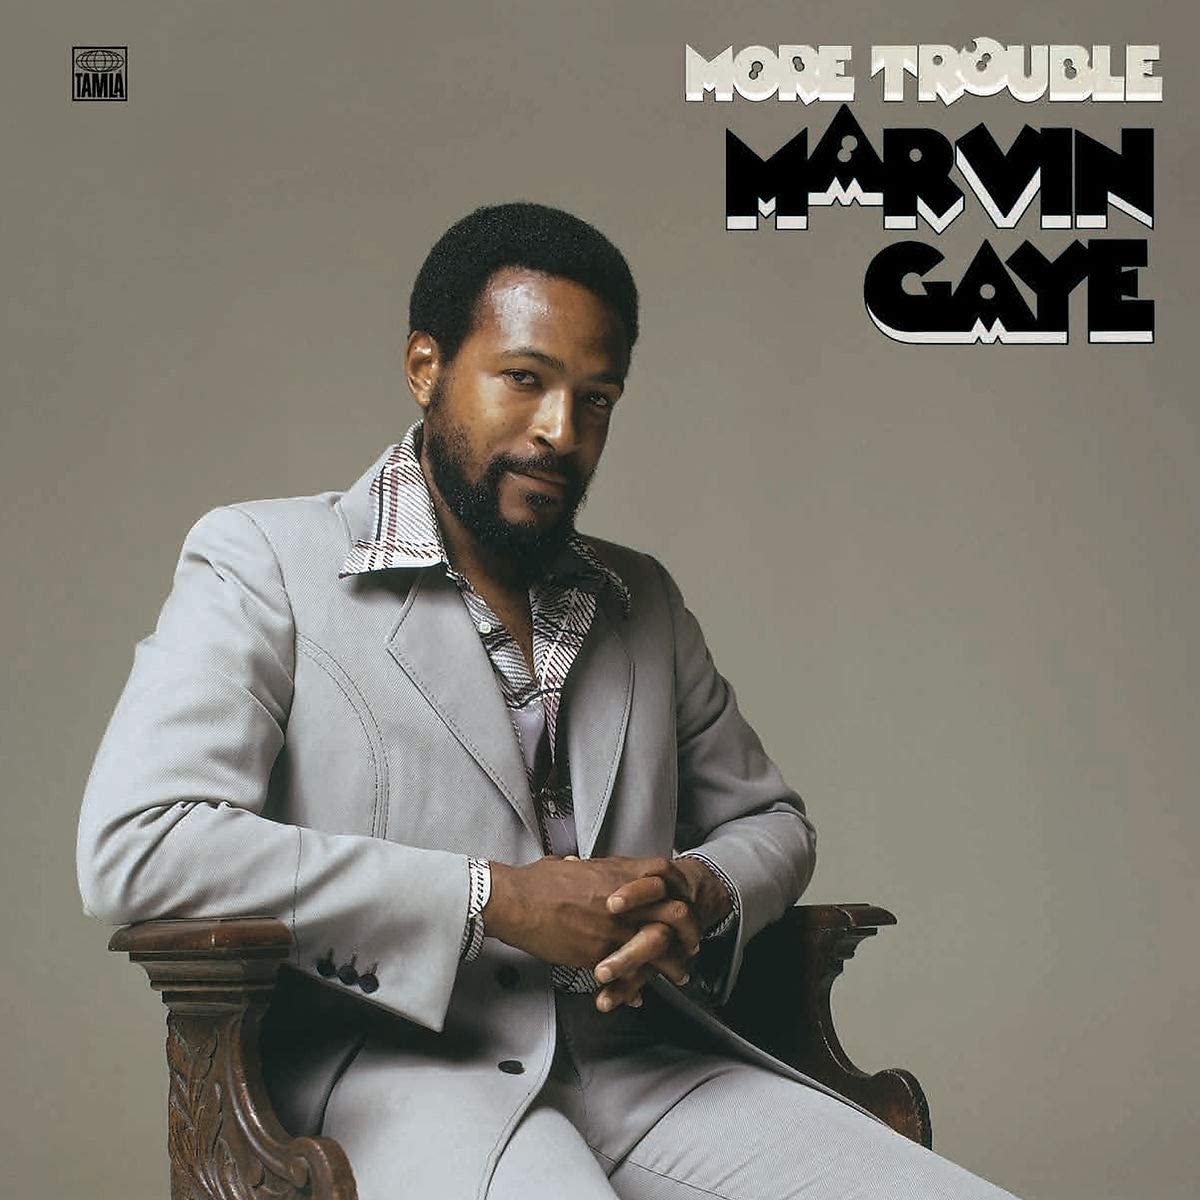 Gaye, Marvin/More Trouble [LP]